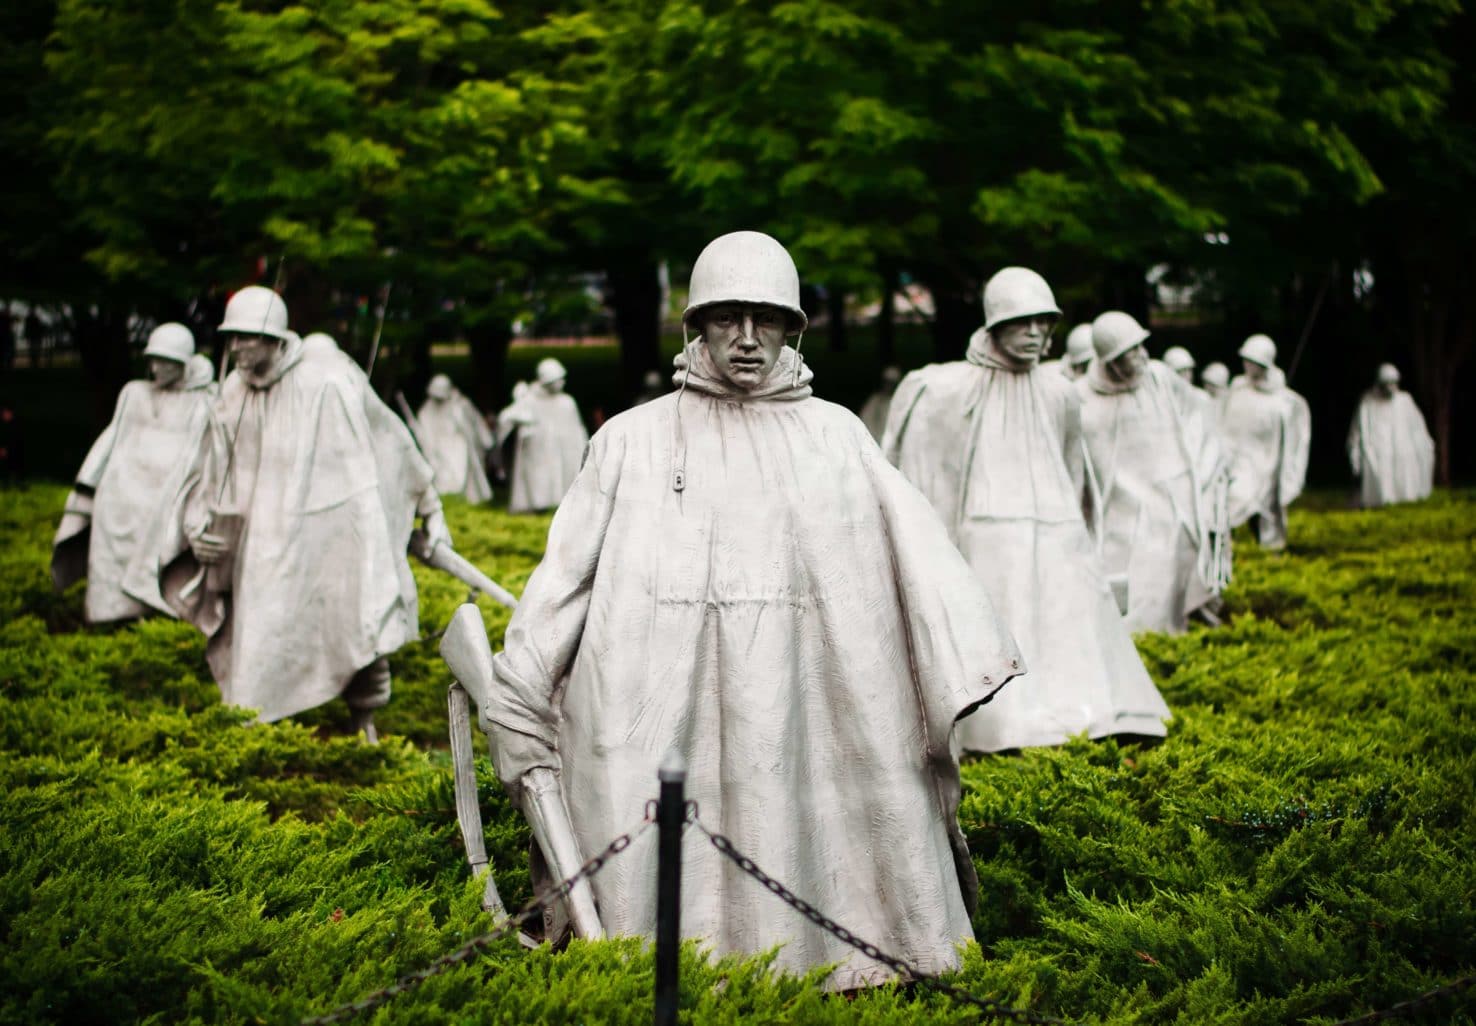 soldier statues wearing all natural cement color rain gear